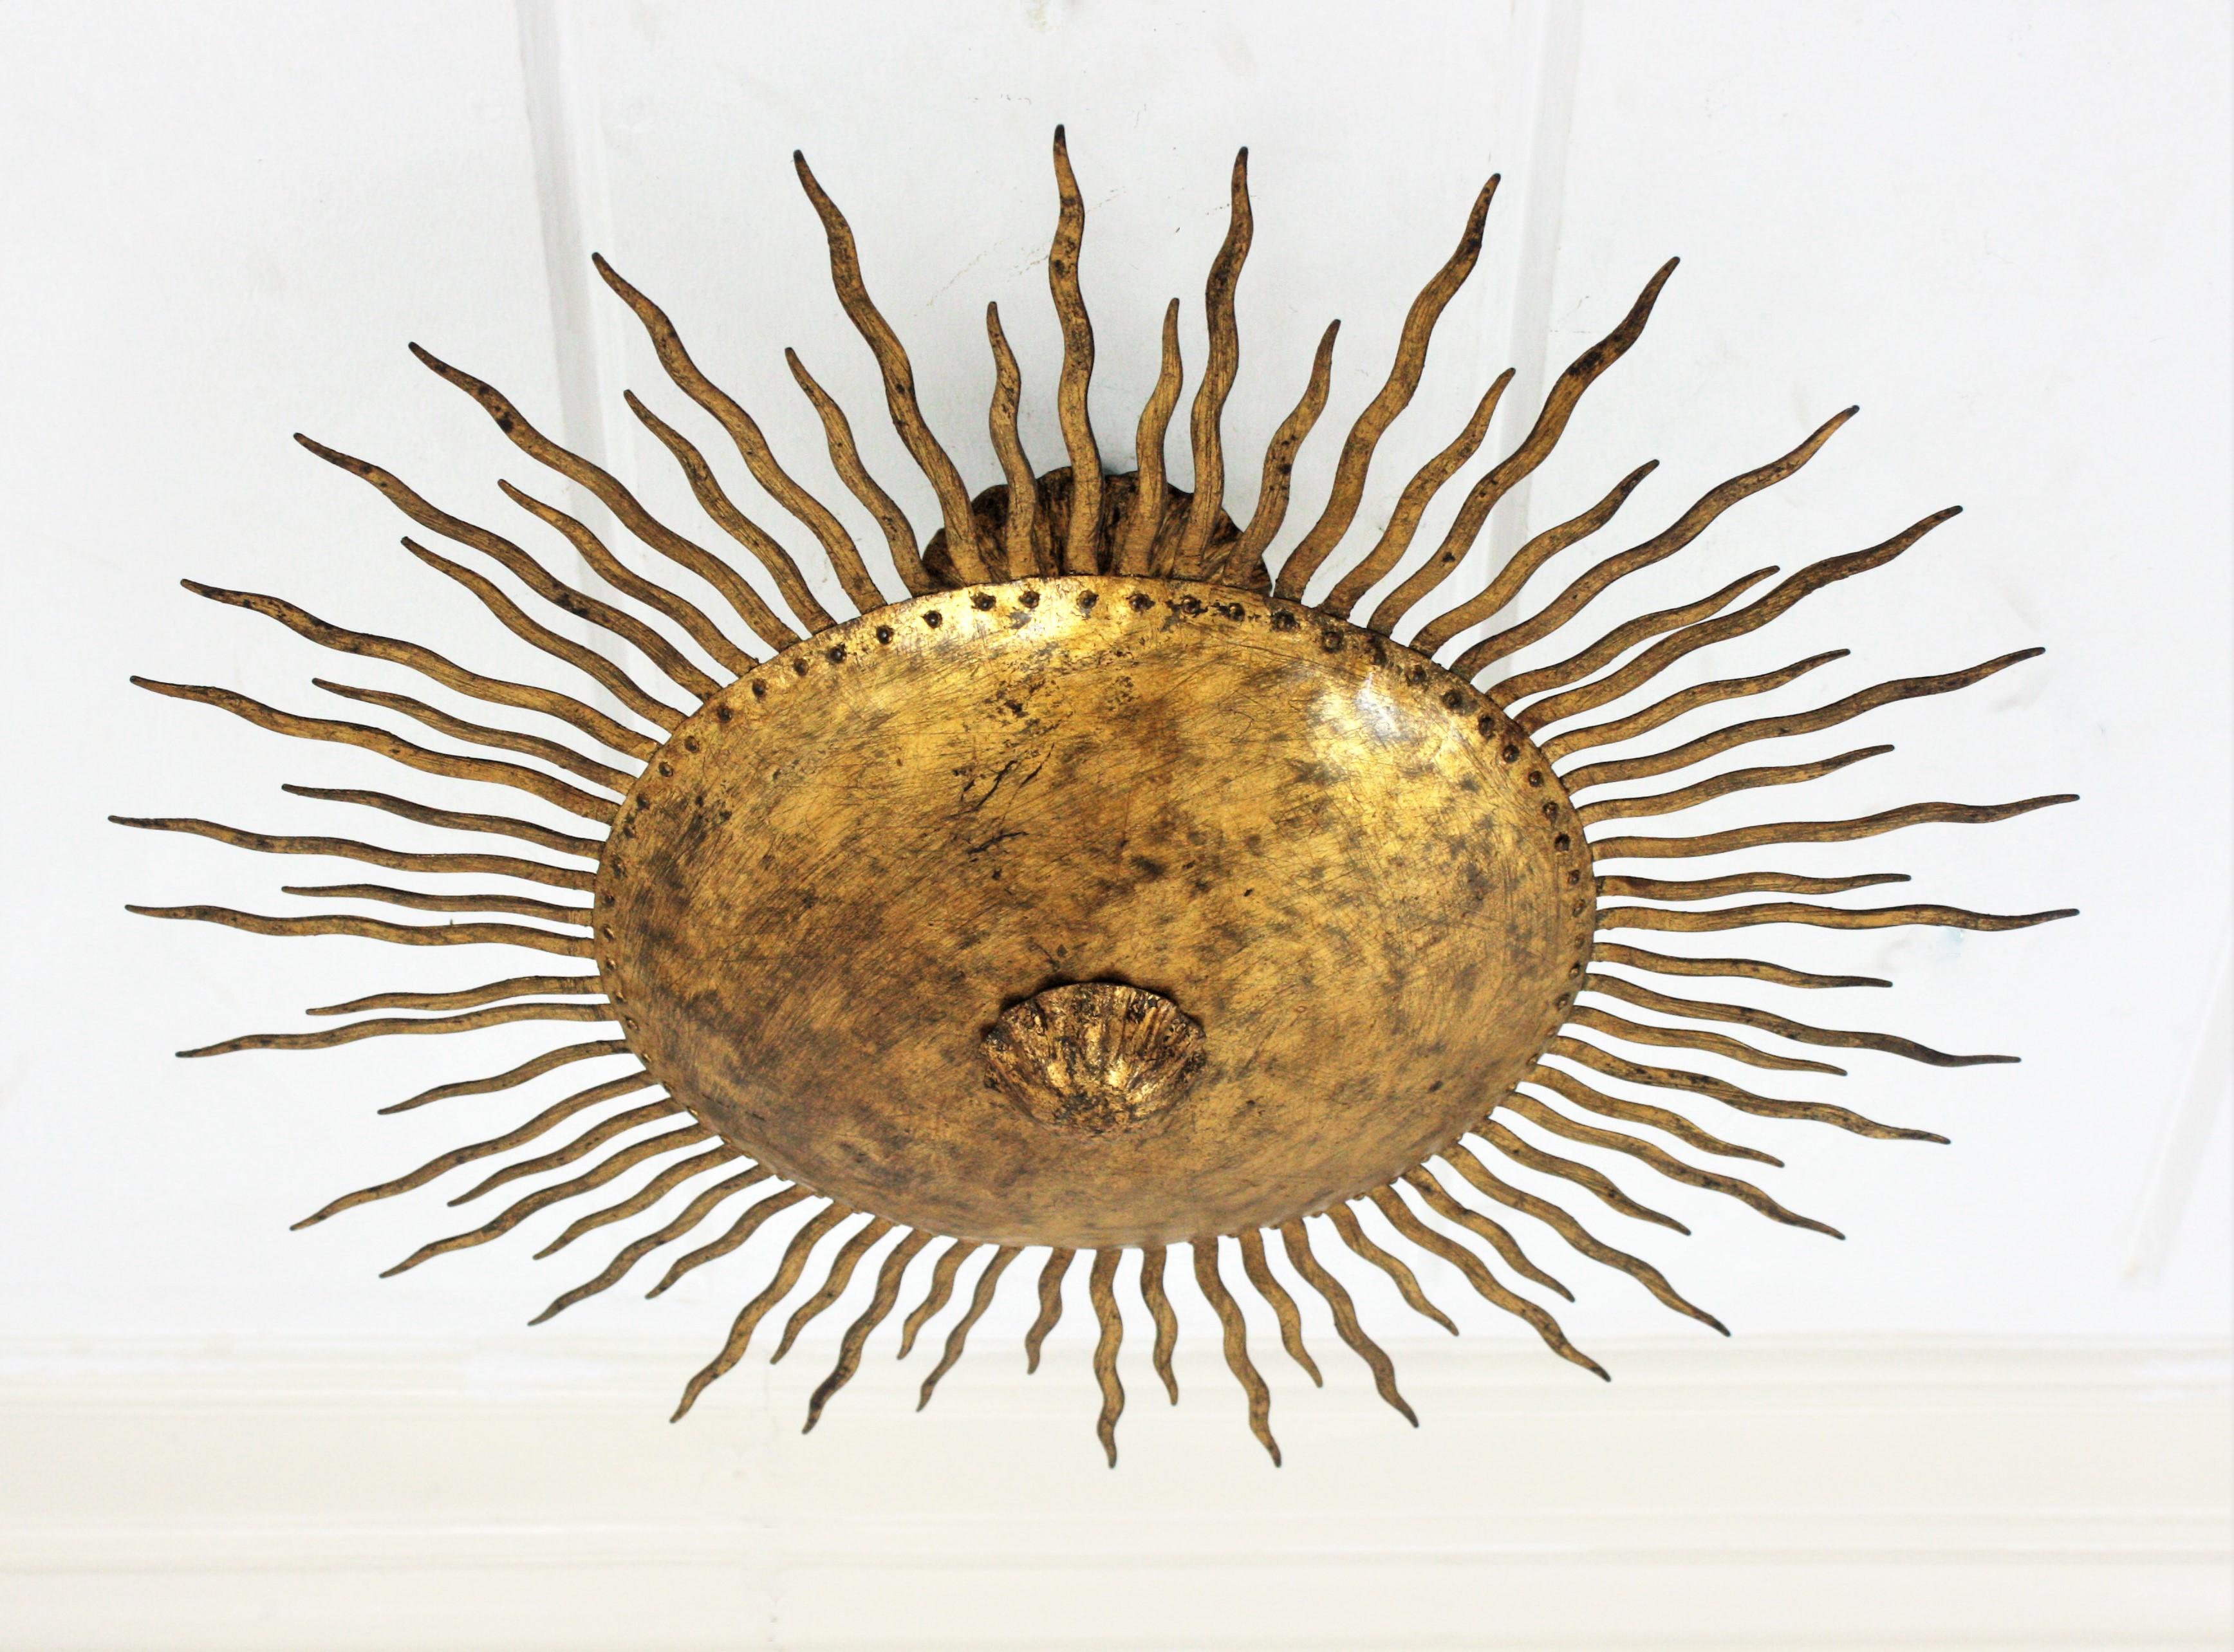 Forged Sunburst Curly Ceiling Light Fixture / Chandelier in Gilt Iron For Sale